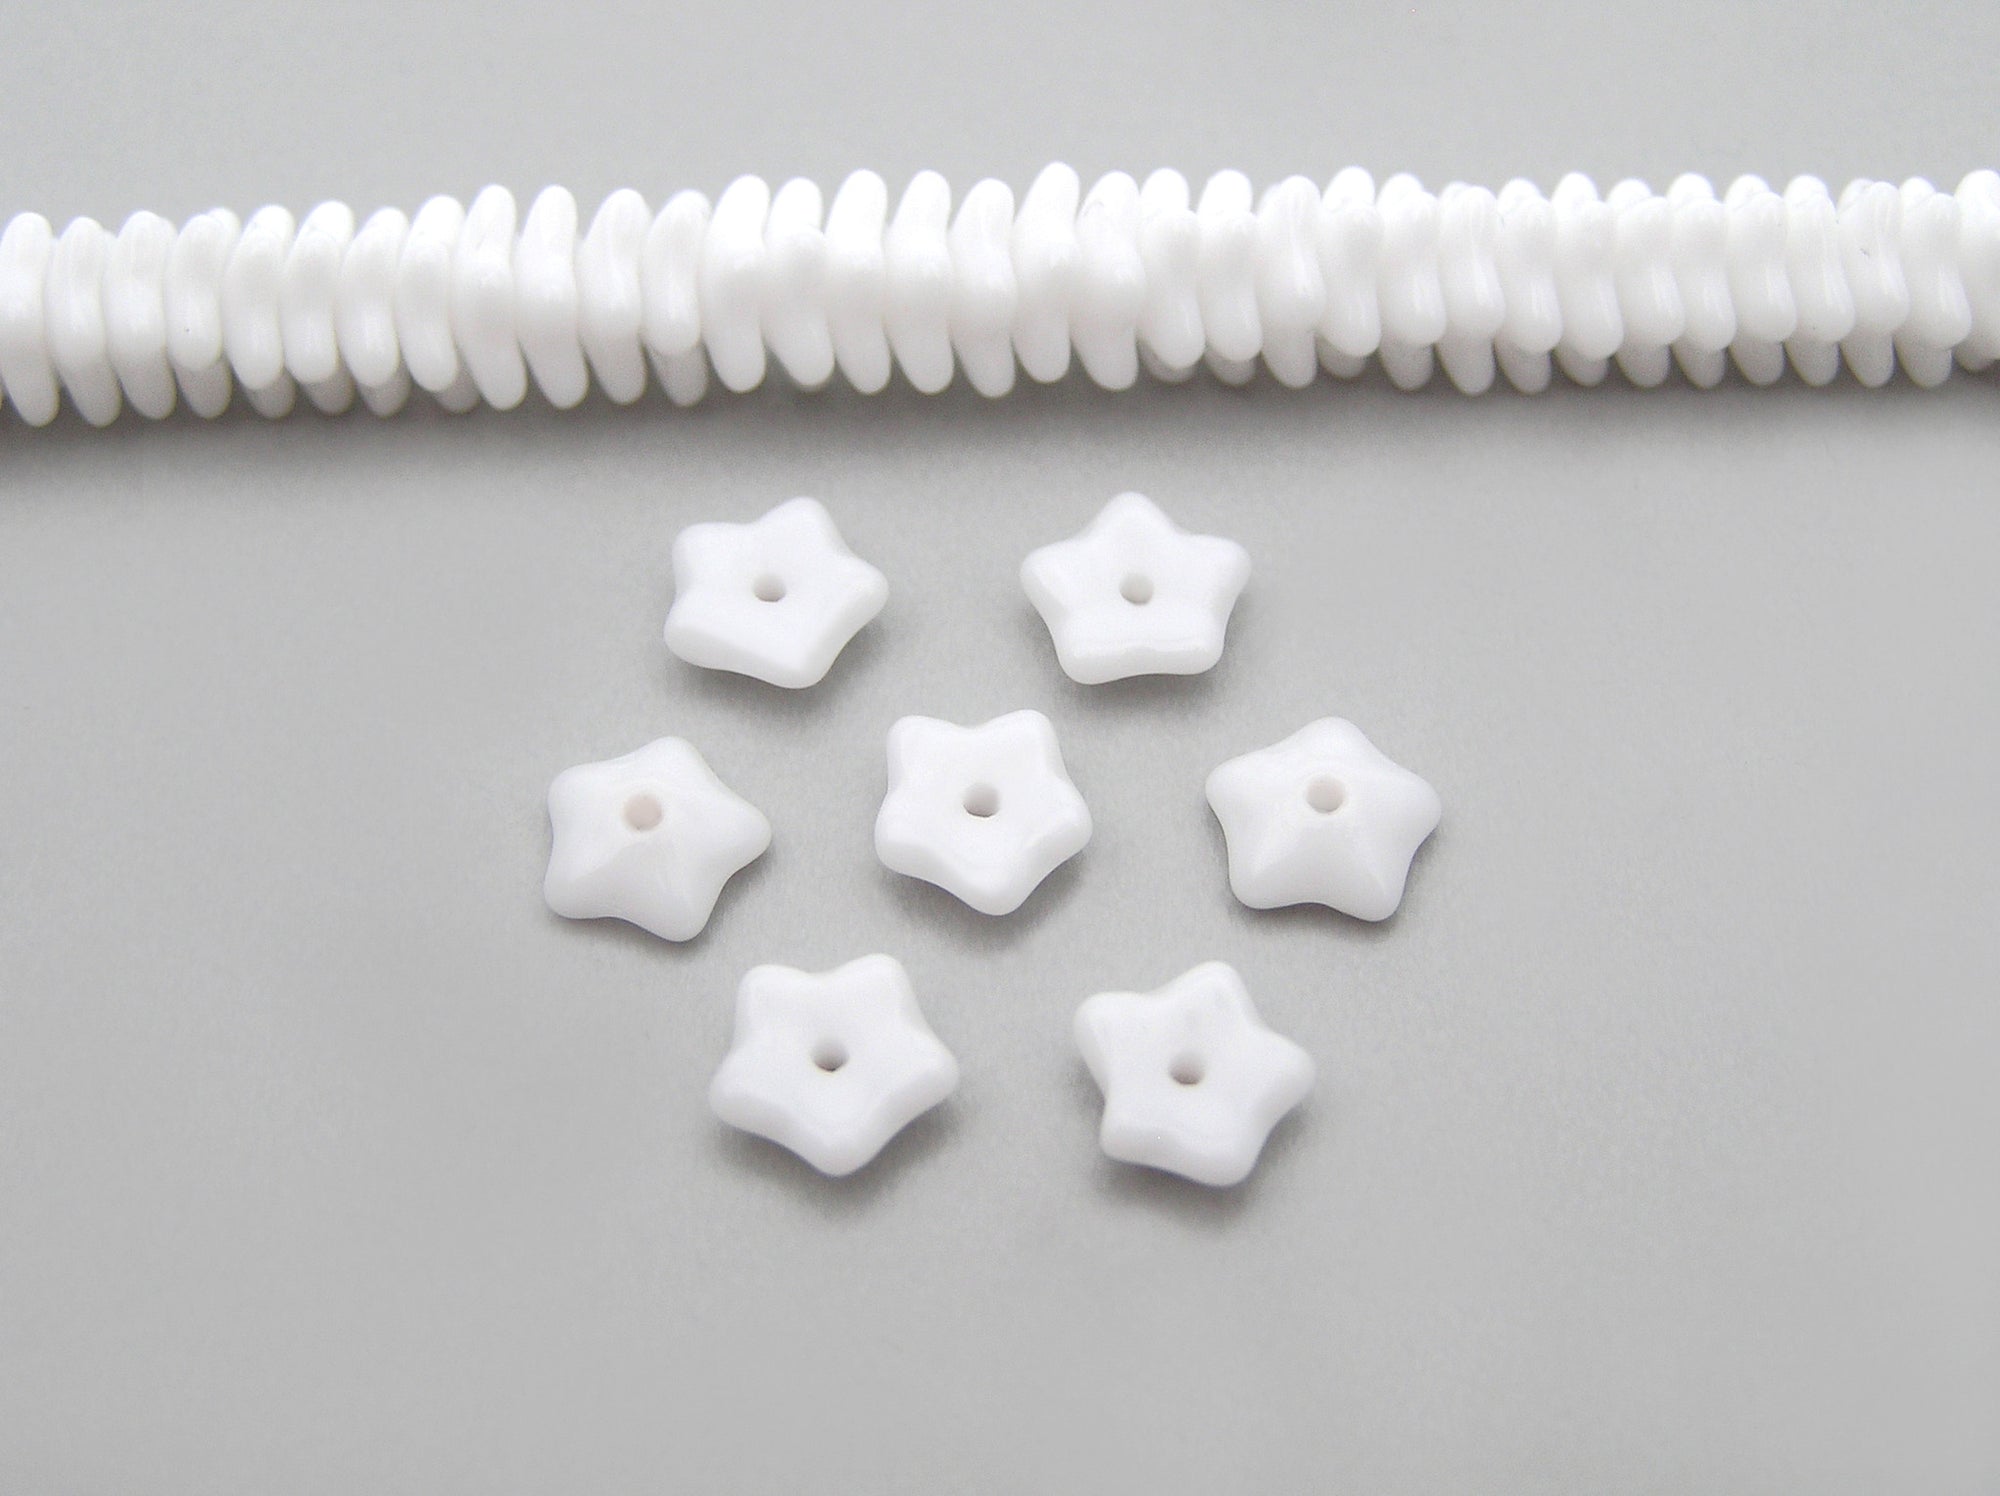 192 Czech glass flat star bead cups 7x3mm Chalk White color, 16 inch strand